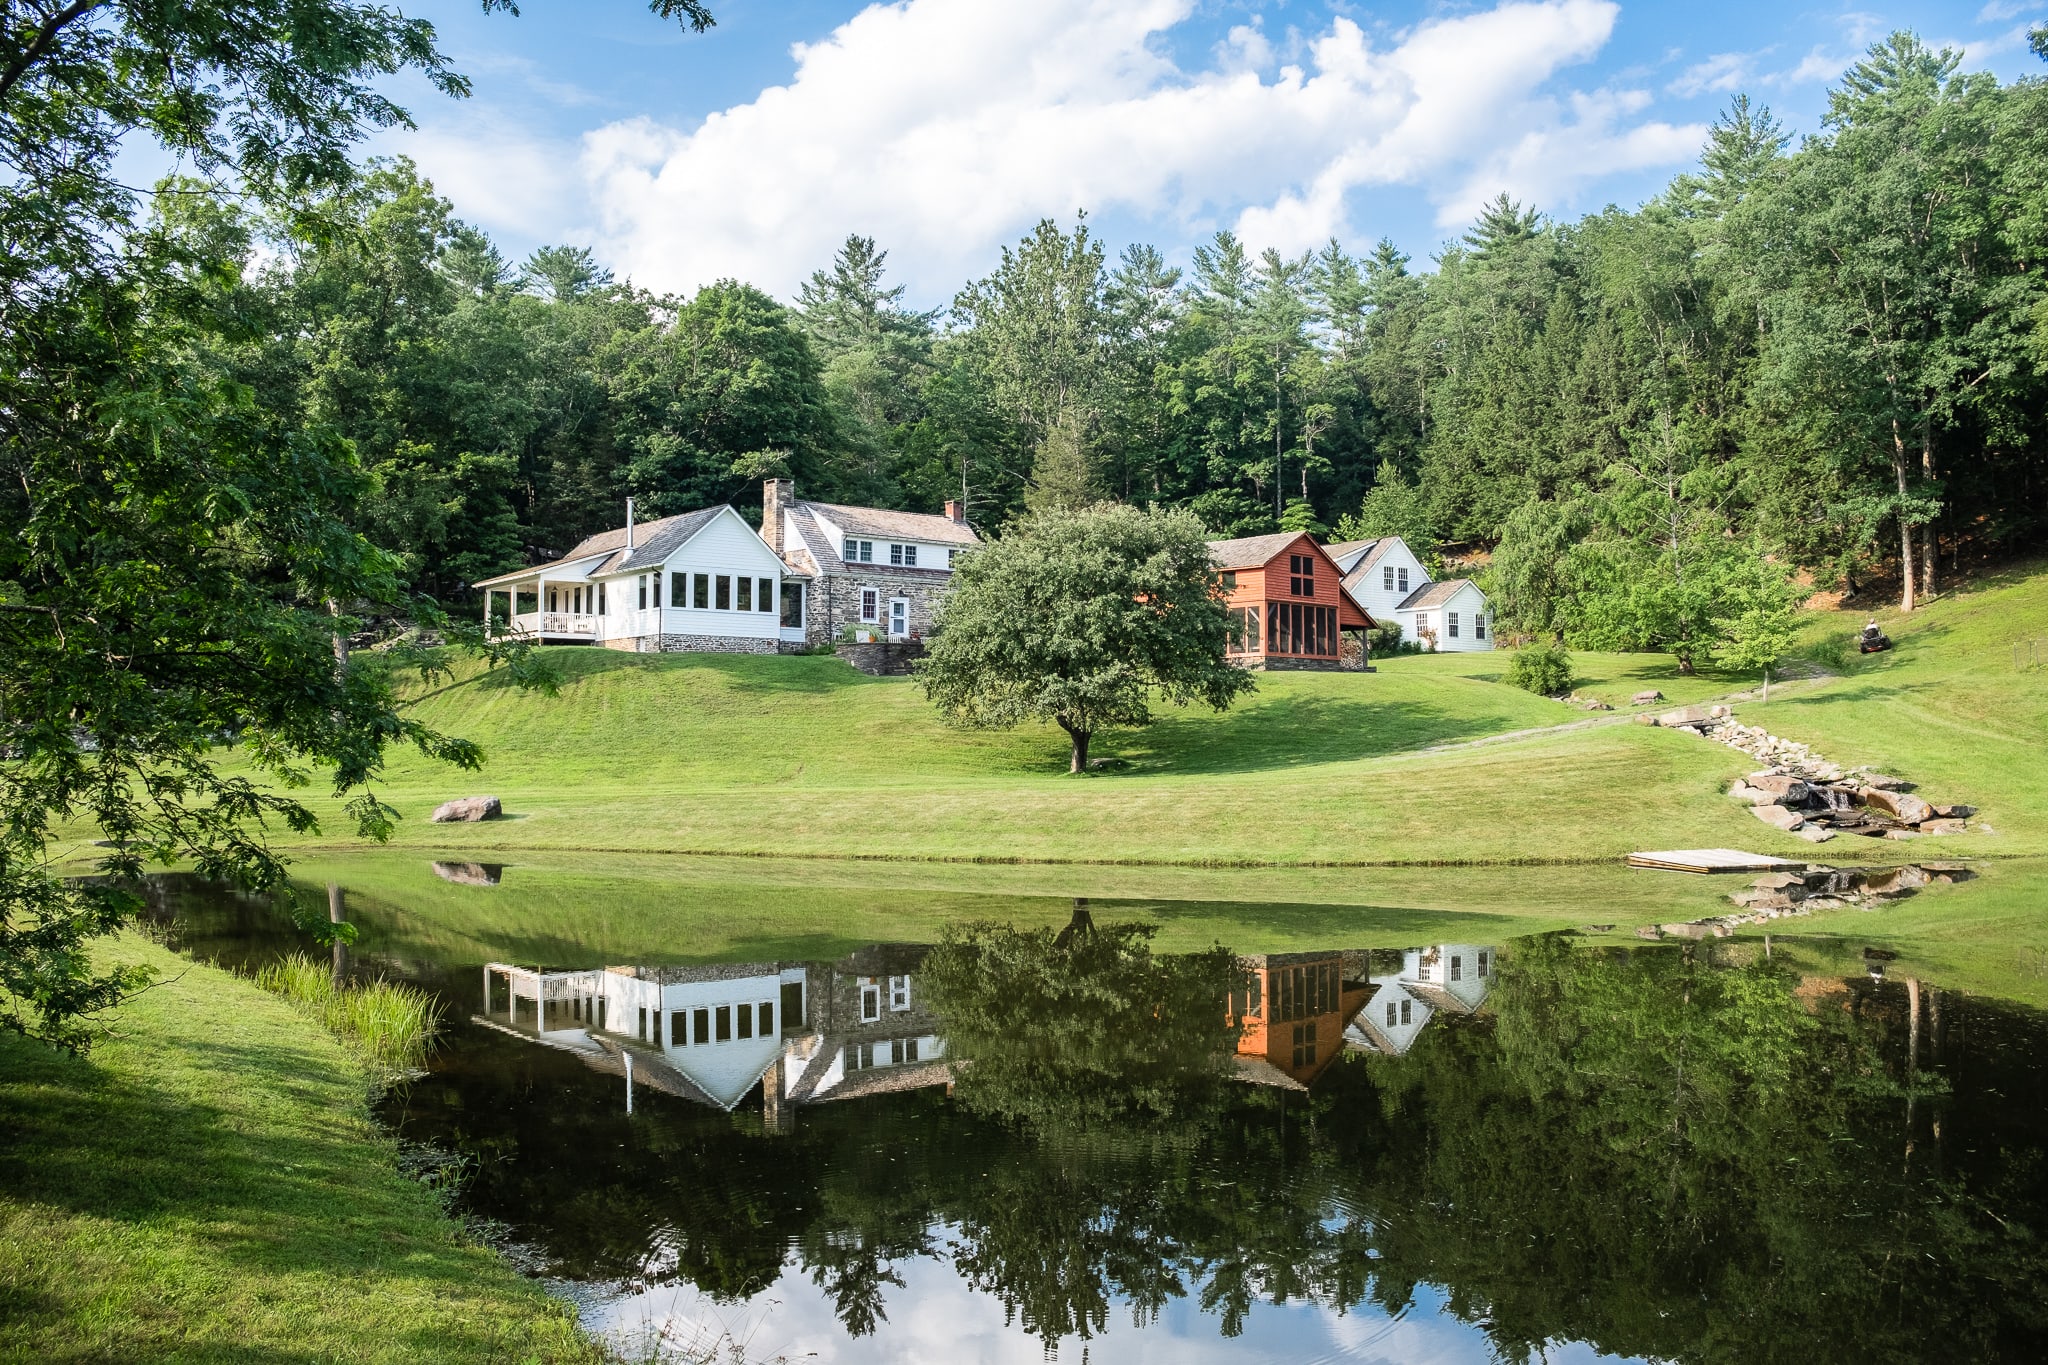 River Rock Lodge,12 acres, Stocked Pond, Hot Tub, WiFi